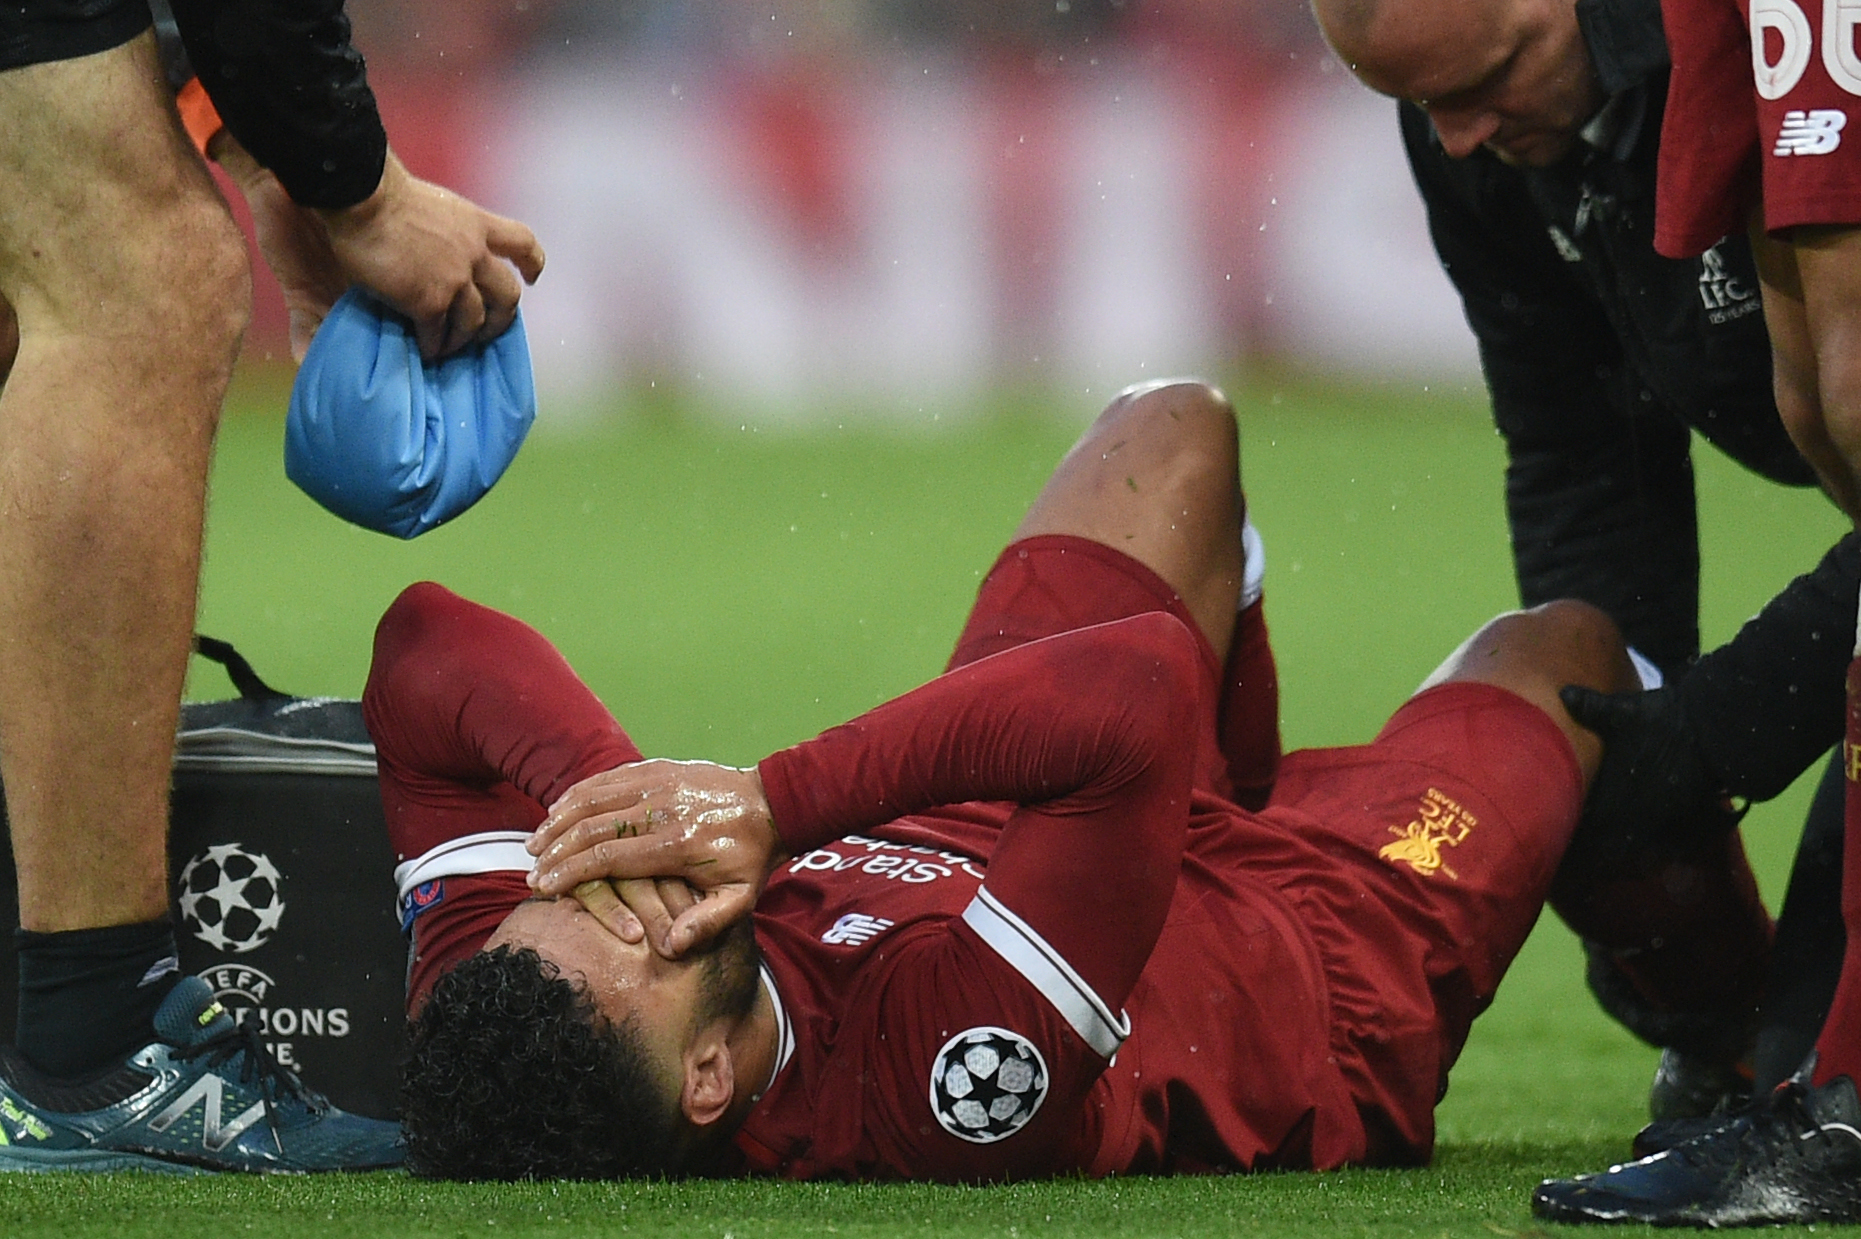 Liverpool's English midfielder Alex Oxlade-Chamberlain reacts after picking up an injury during the UEFA Champions League first leg semi-final football match between Liverpool and Roma at Anfield stadium in Liverpool, north west England on April 24, 2018. (Photo by Oli SCARFF / AFP) 